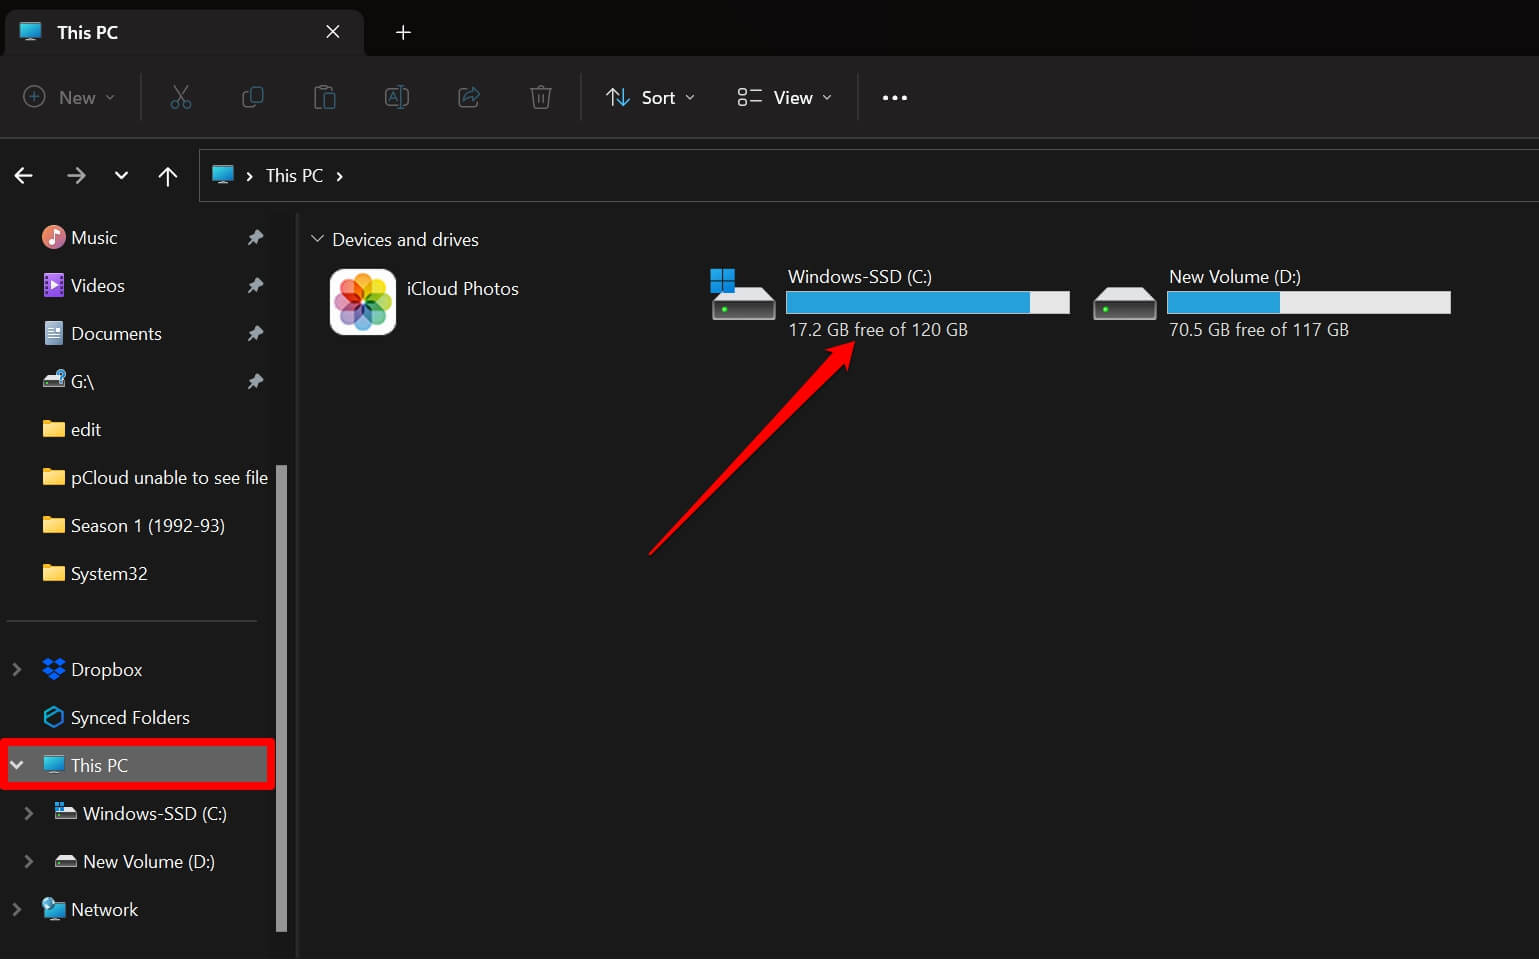 Available Free Space in Drive on Windows File Explorer